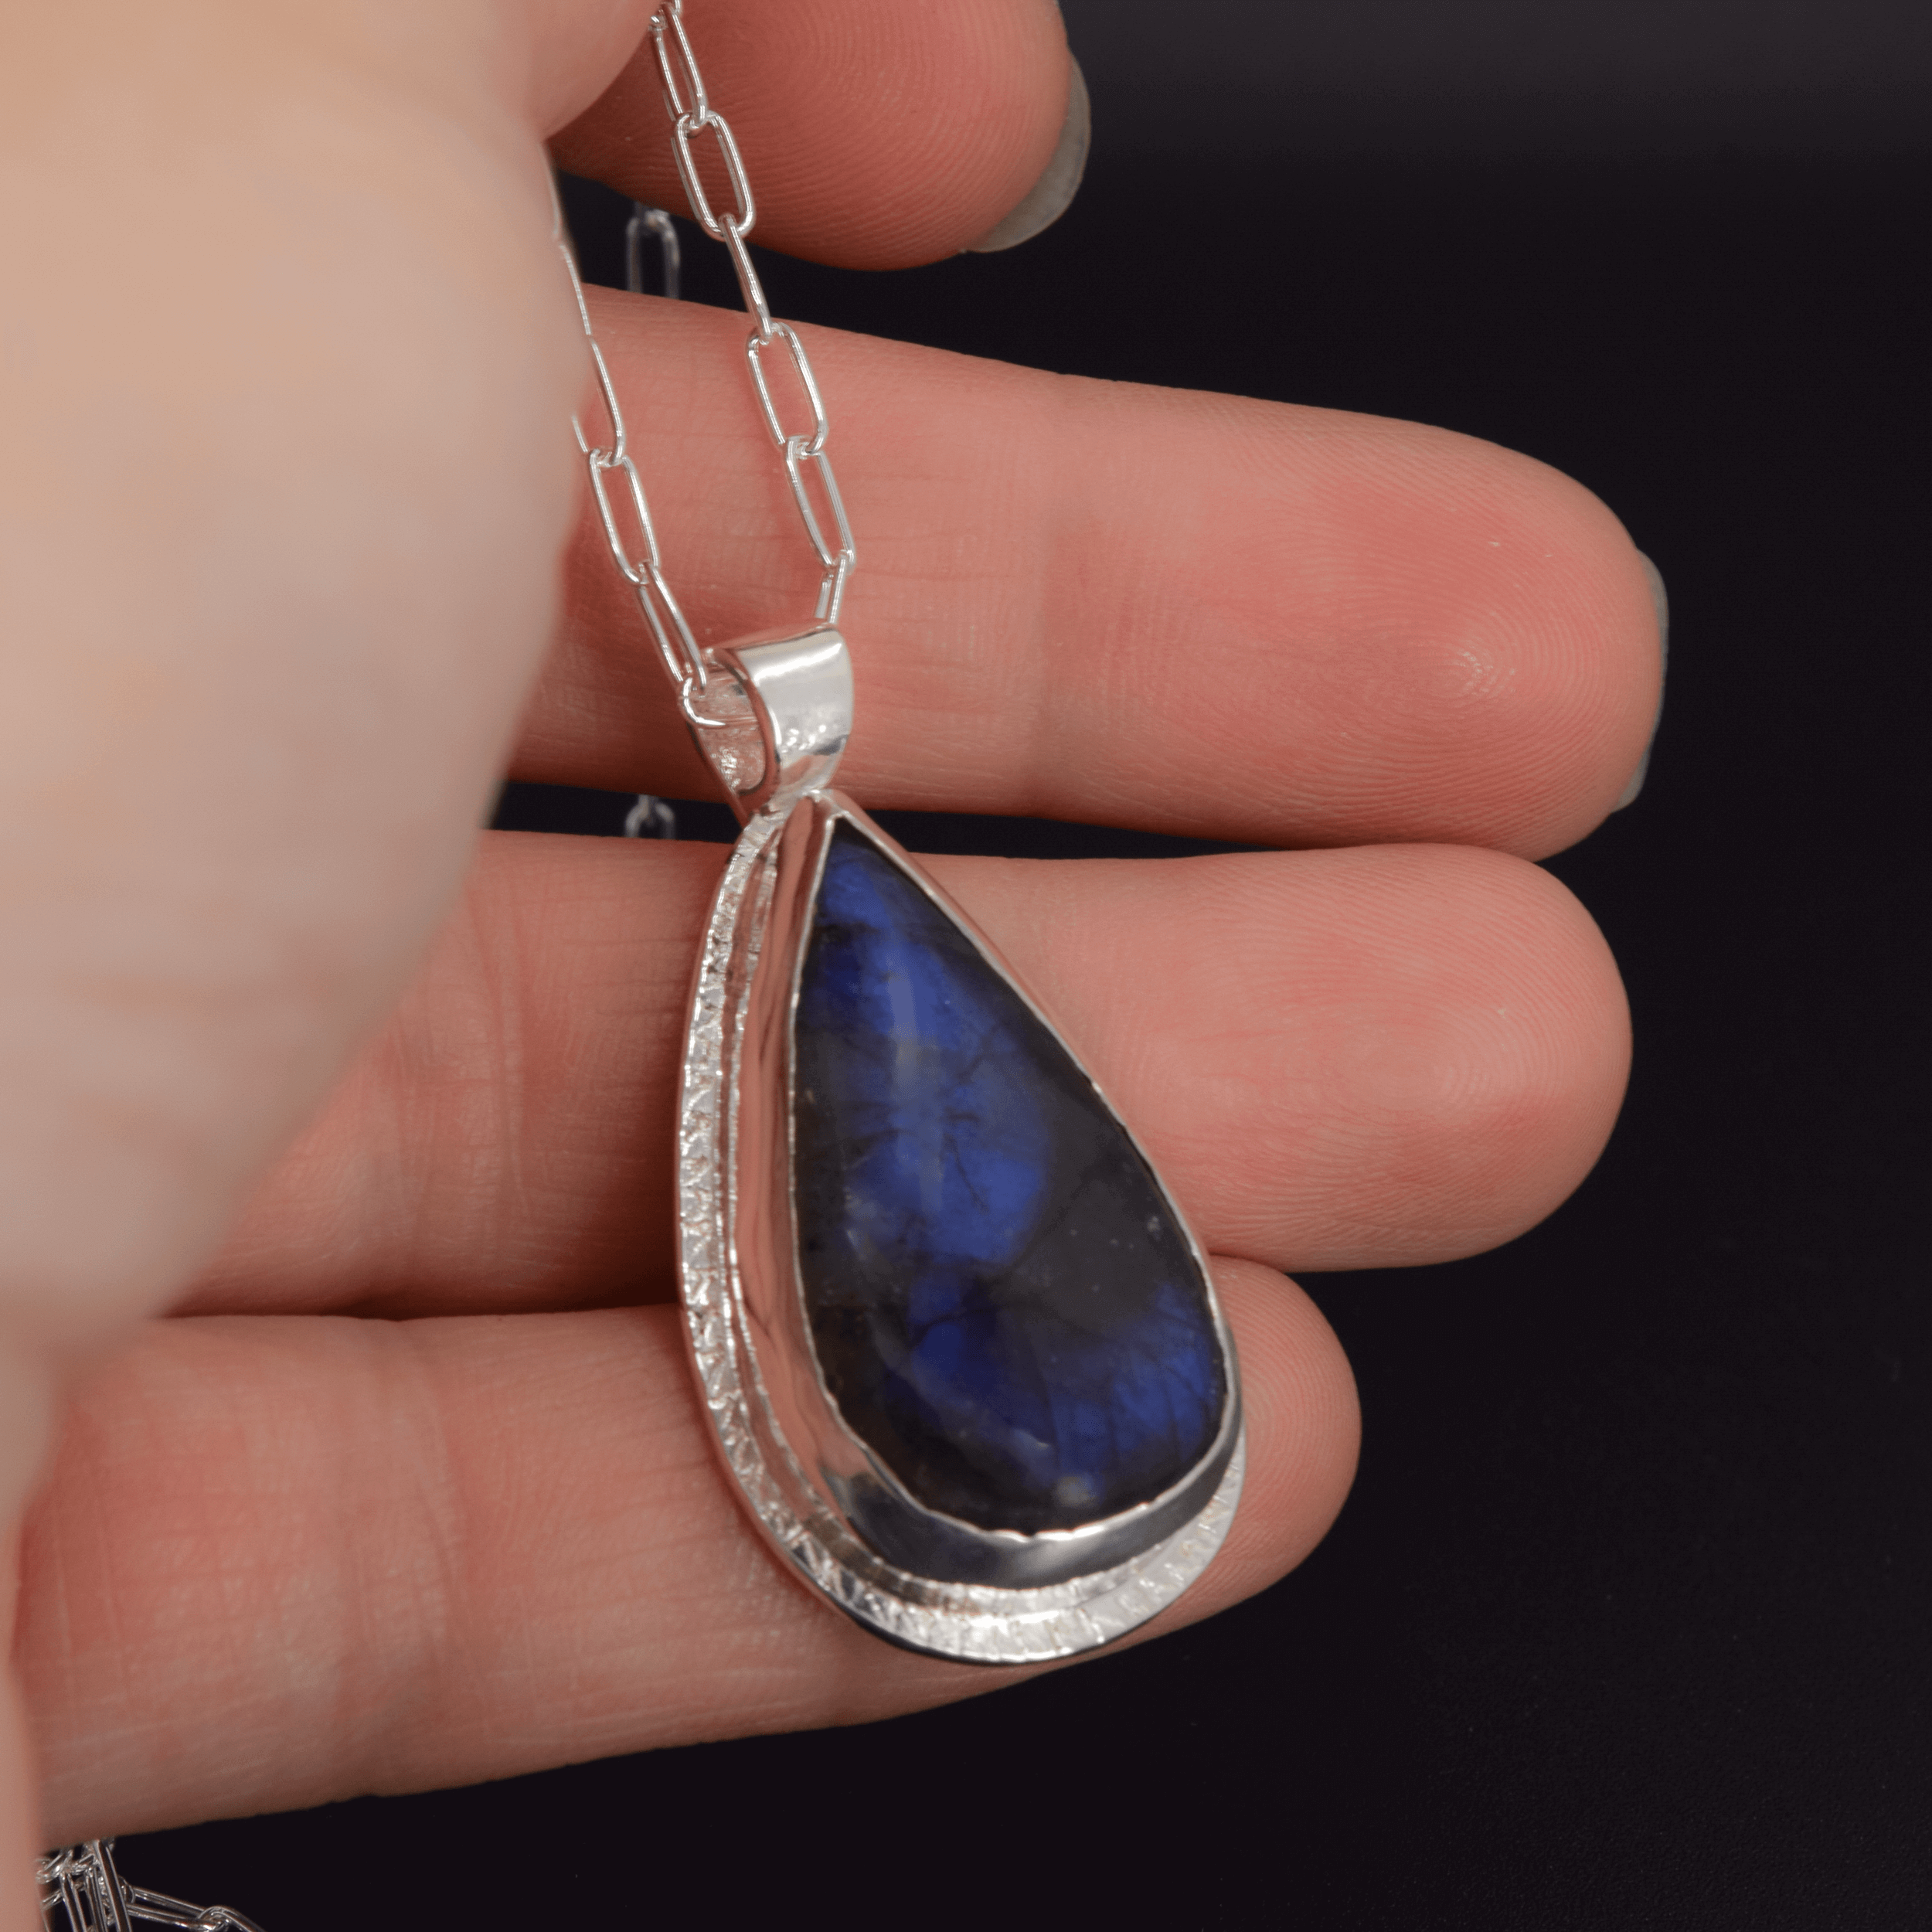 sterling silver pendant with a labradorite stone that has blue flashes hanging from a paperclip style chain held in hand for scale